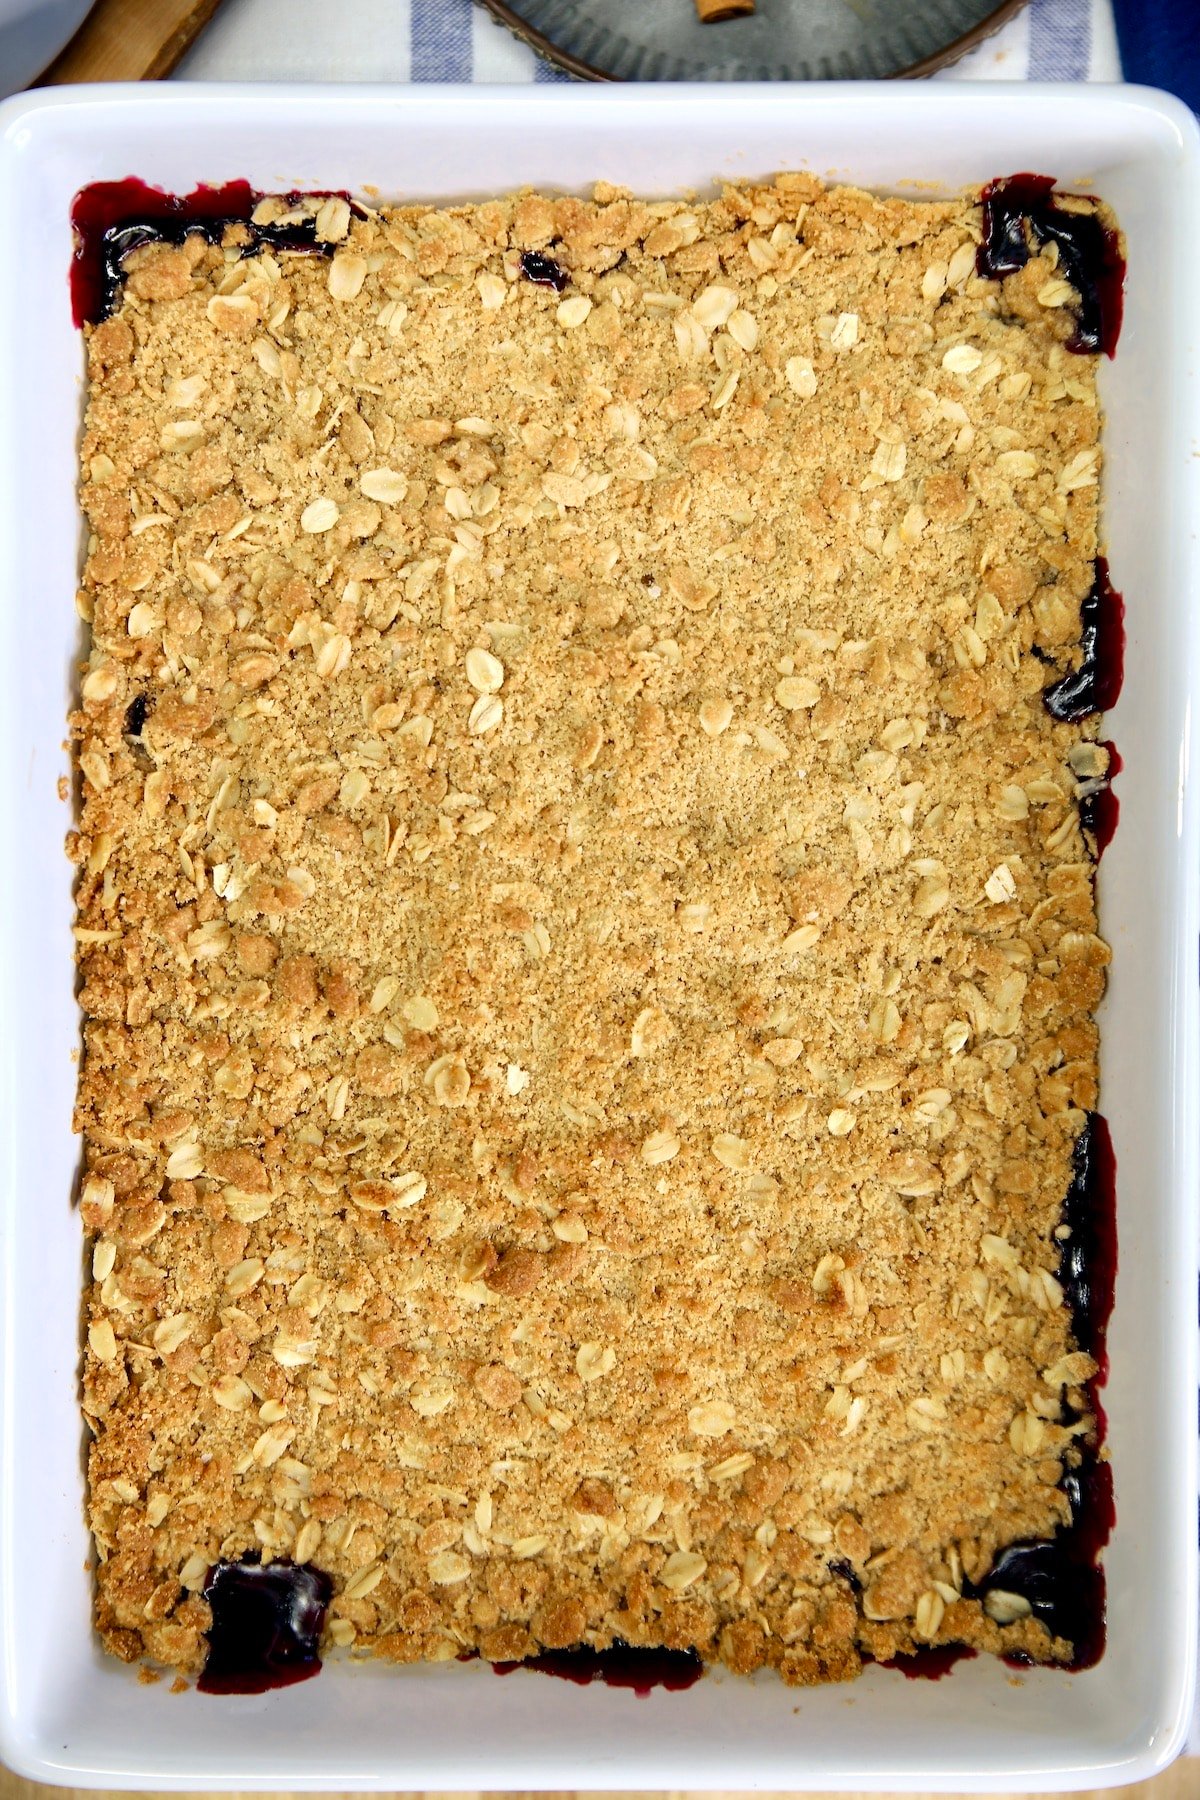 Baked blueberry crisp in a rectangle dish.